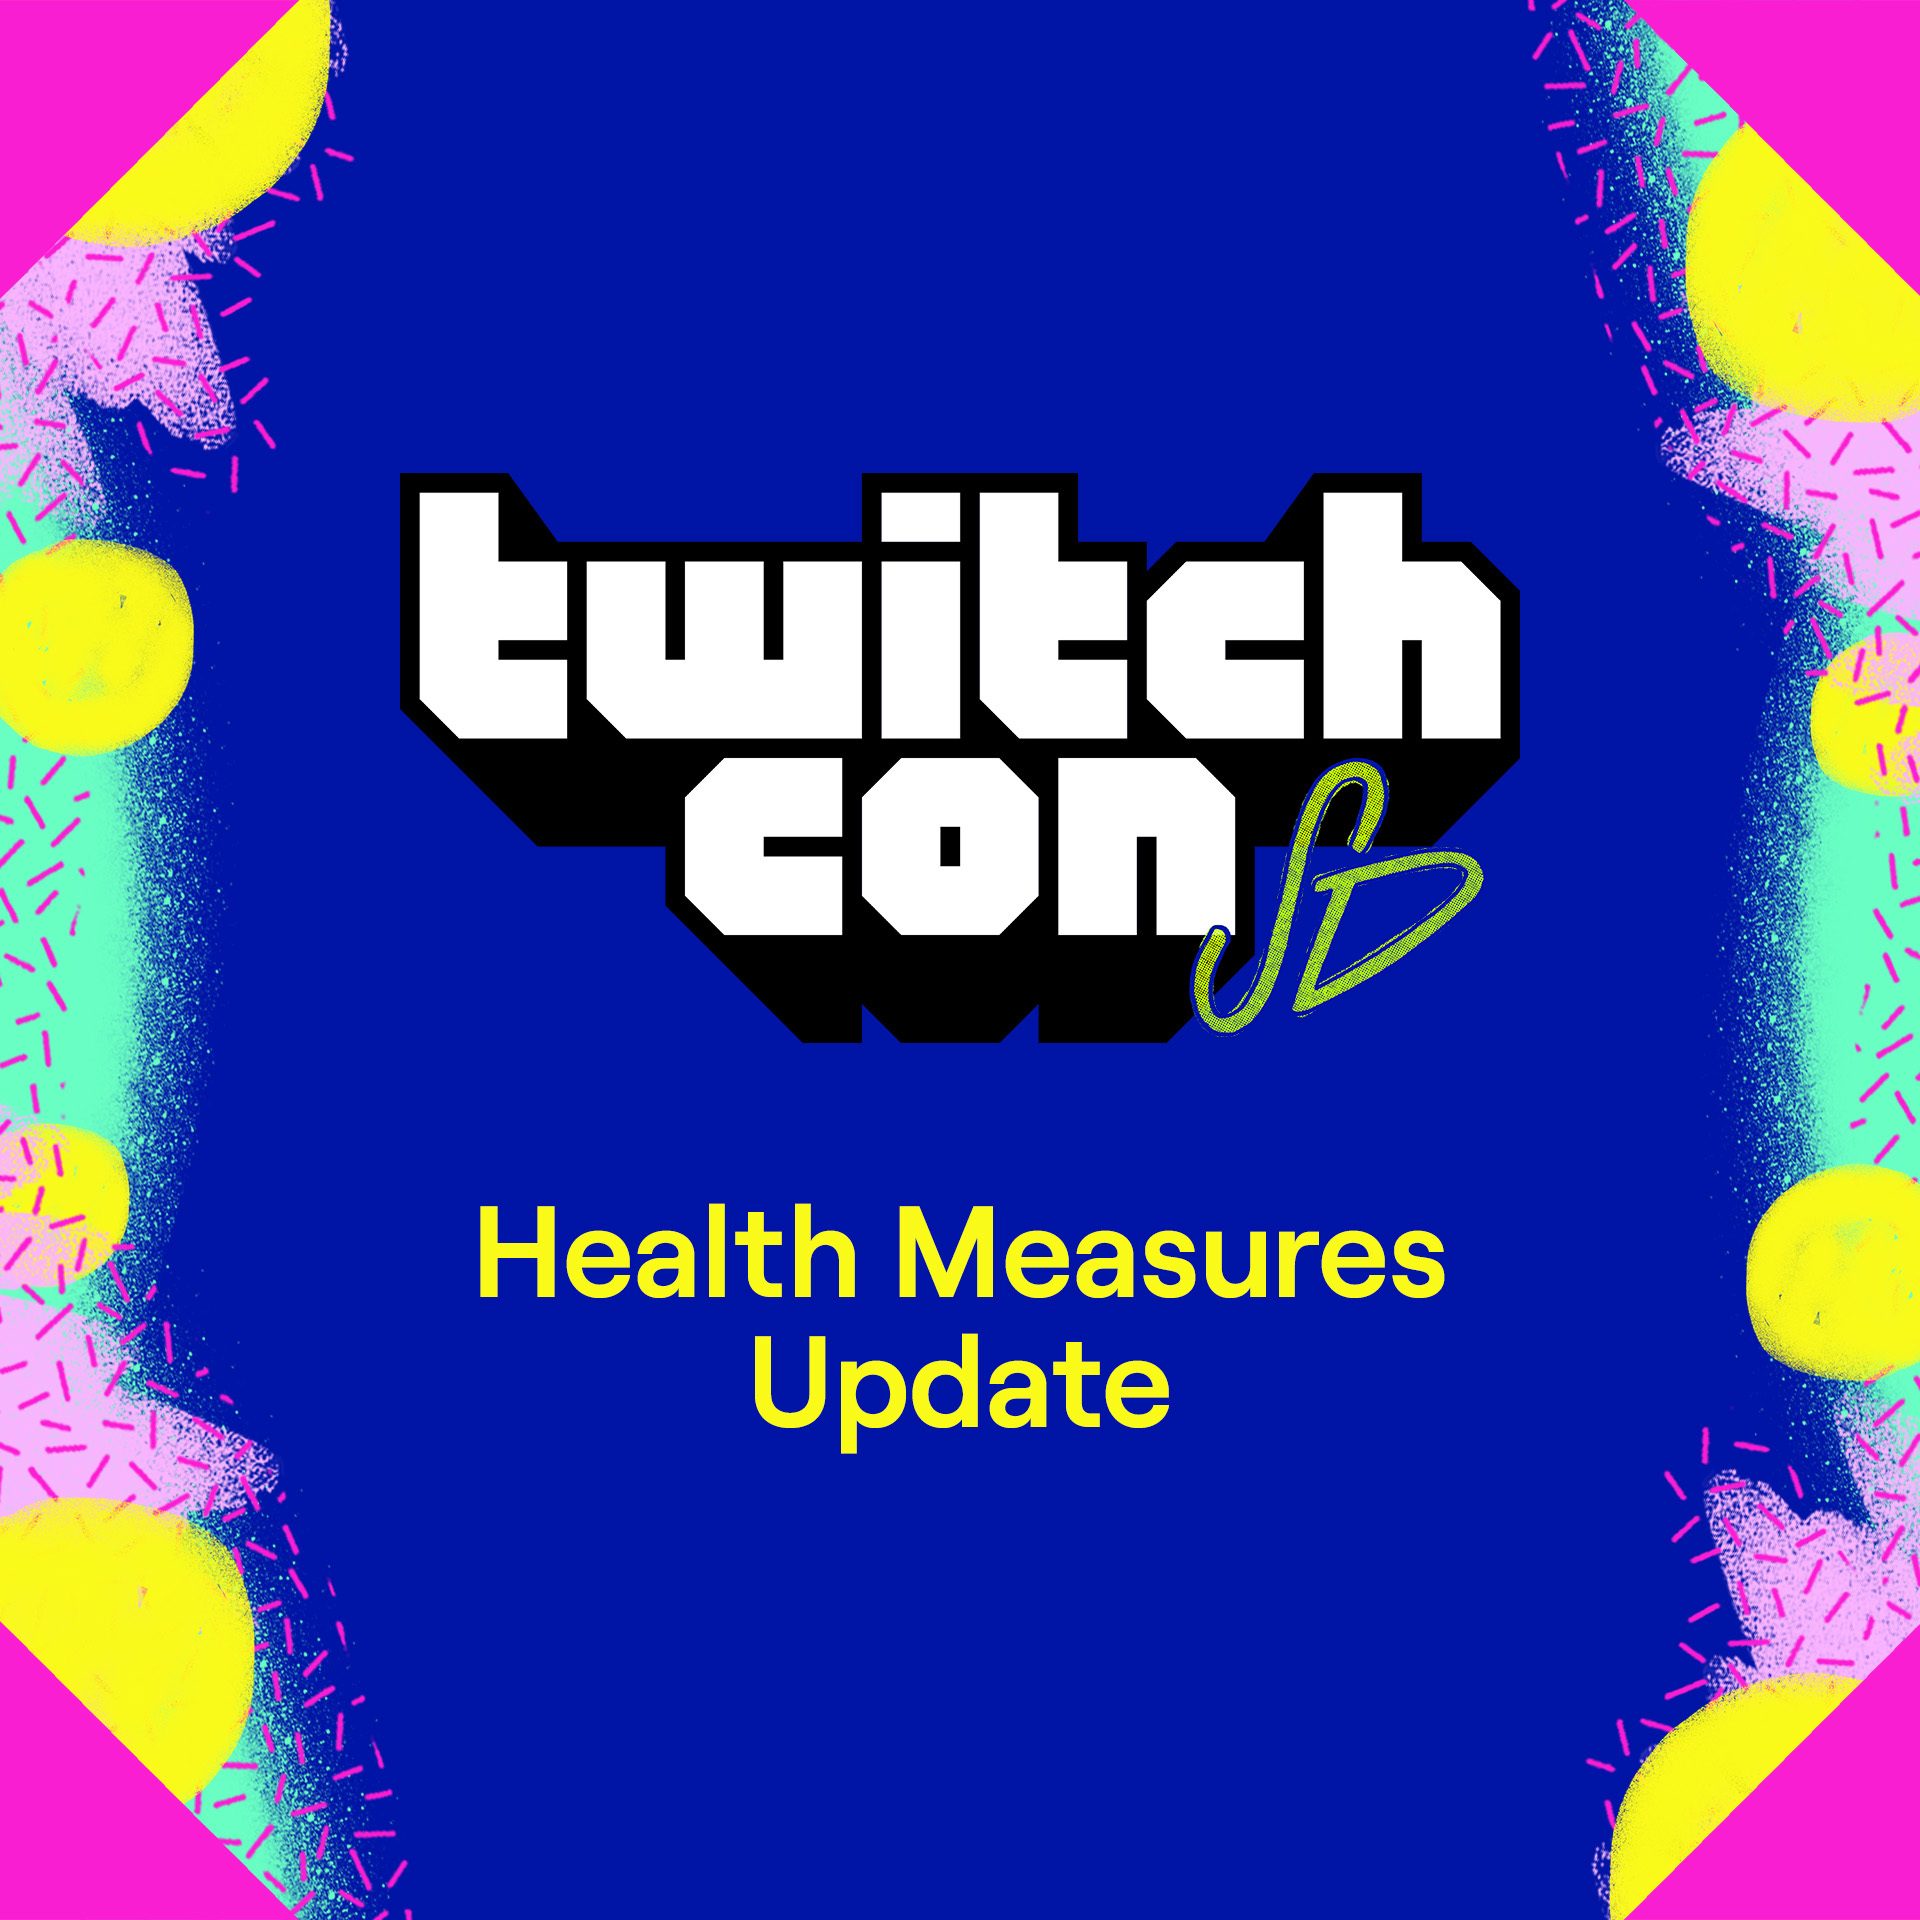 Twitch Updates Health Measures, Masks Will Be Required Indoors As Well As Proof Of Vaccination For TwitchCon 2022